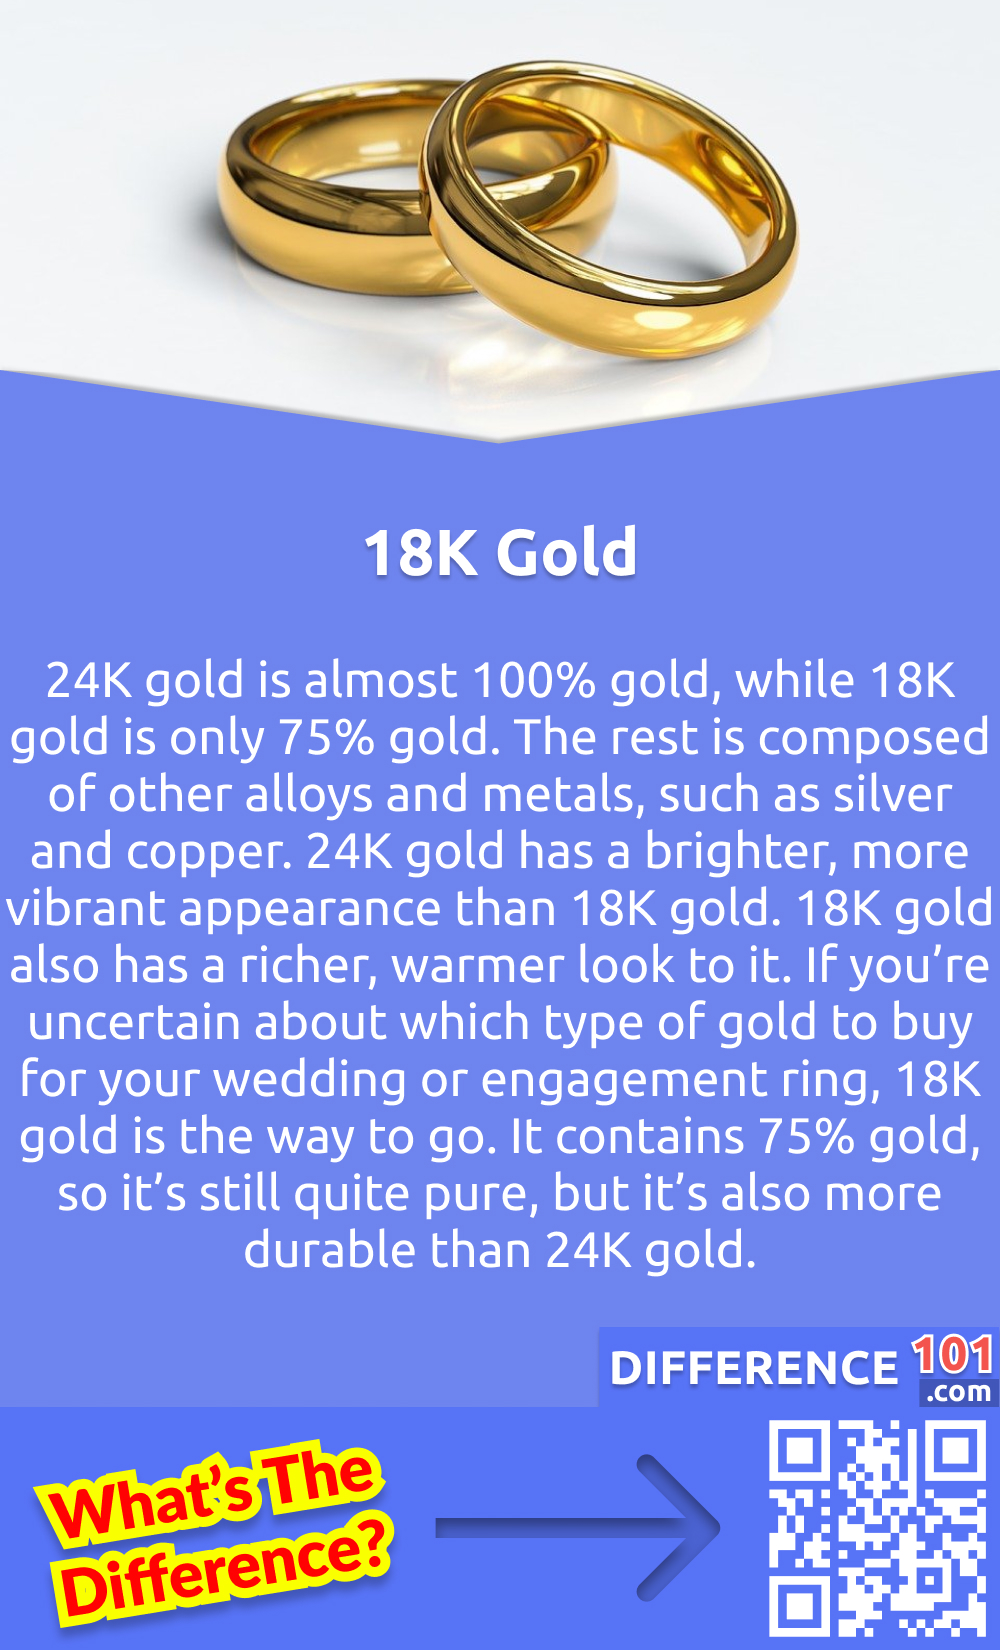 18K Gold: What Is It? 24K gold is almost 100% gold, while 18K gold is only 75% gold. The rest is composed of other alloys and metals, such as silver and copper. 24K gold has a brighter, more vibrant appearance than 18K gold. 18K gold also has a richer, warmer look to it. If you’re uncertain about which type of gold to buy for your wedding or engagement ring, 18K gold is the way to go. It contains 75% gold, so it’s still quite pure, but it’s also more durable than 24K gold.